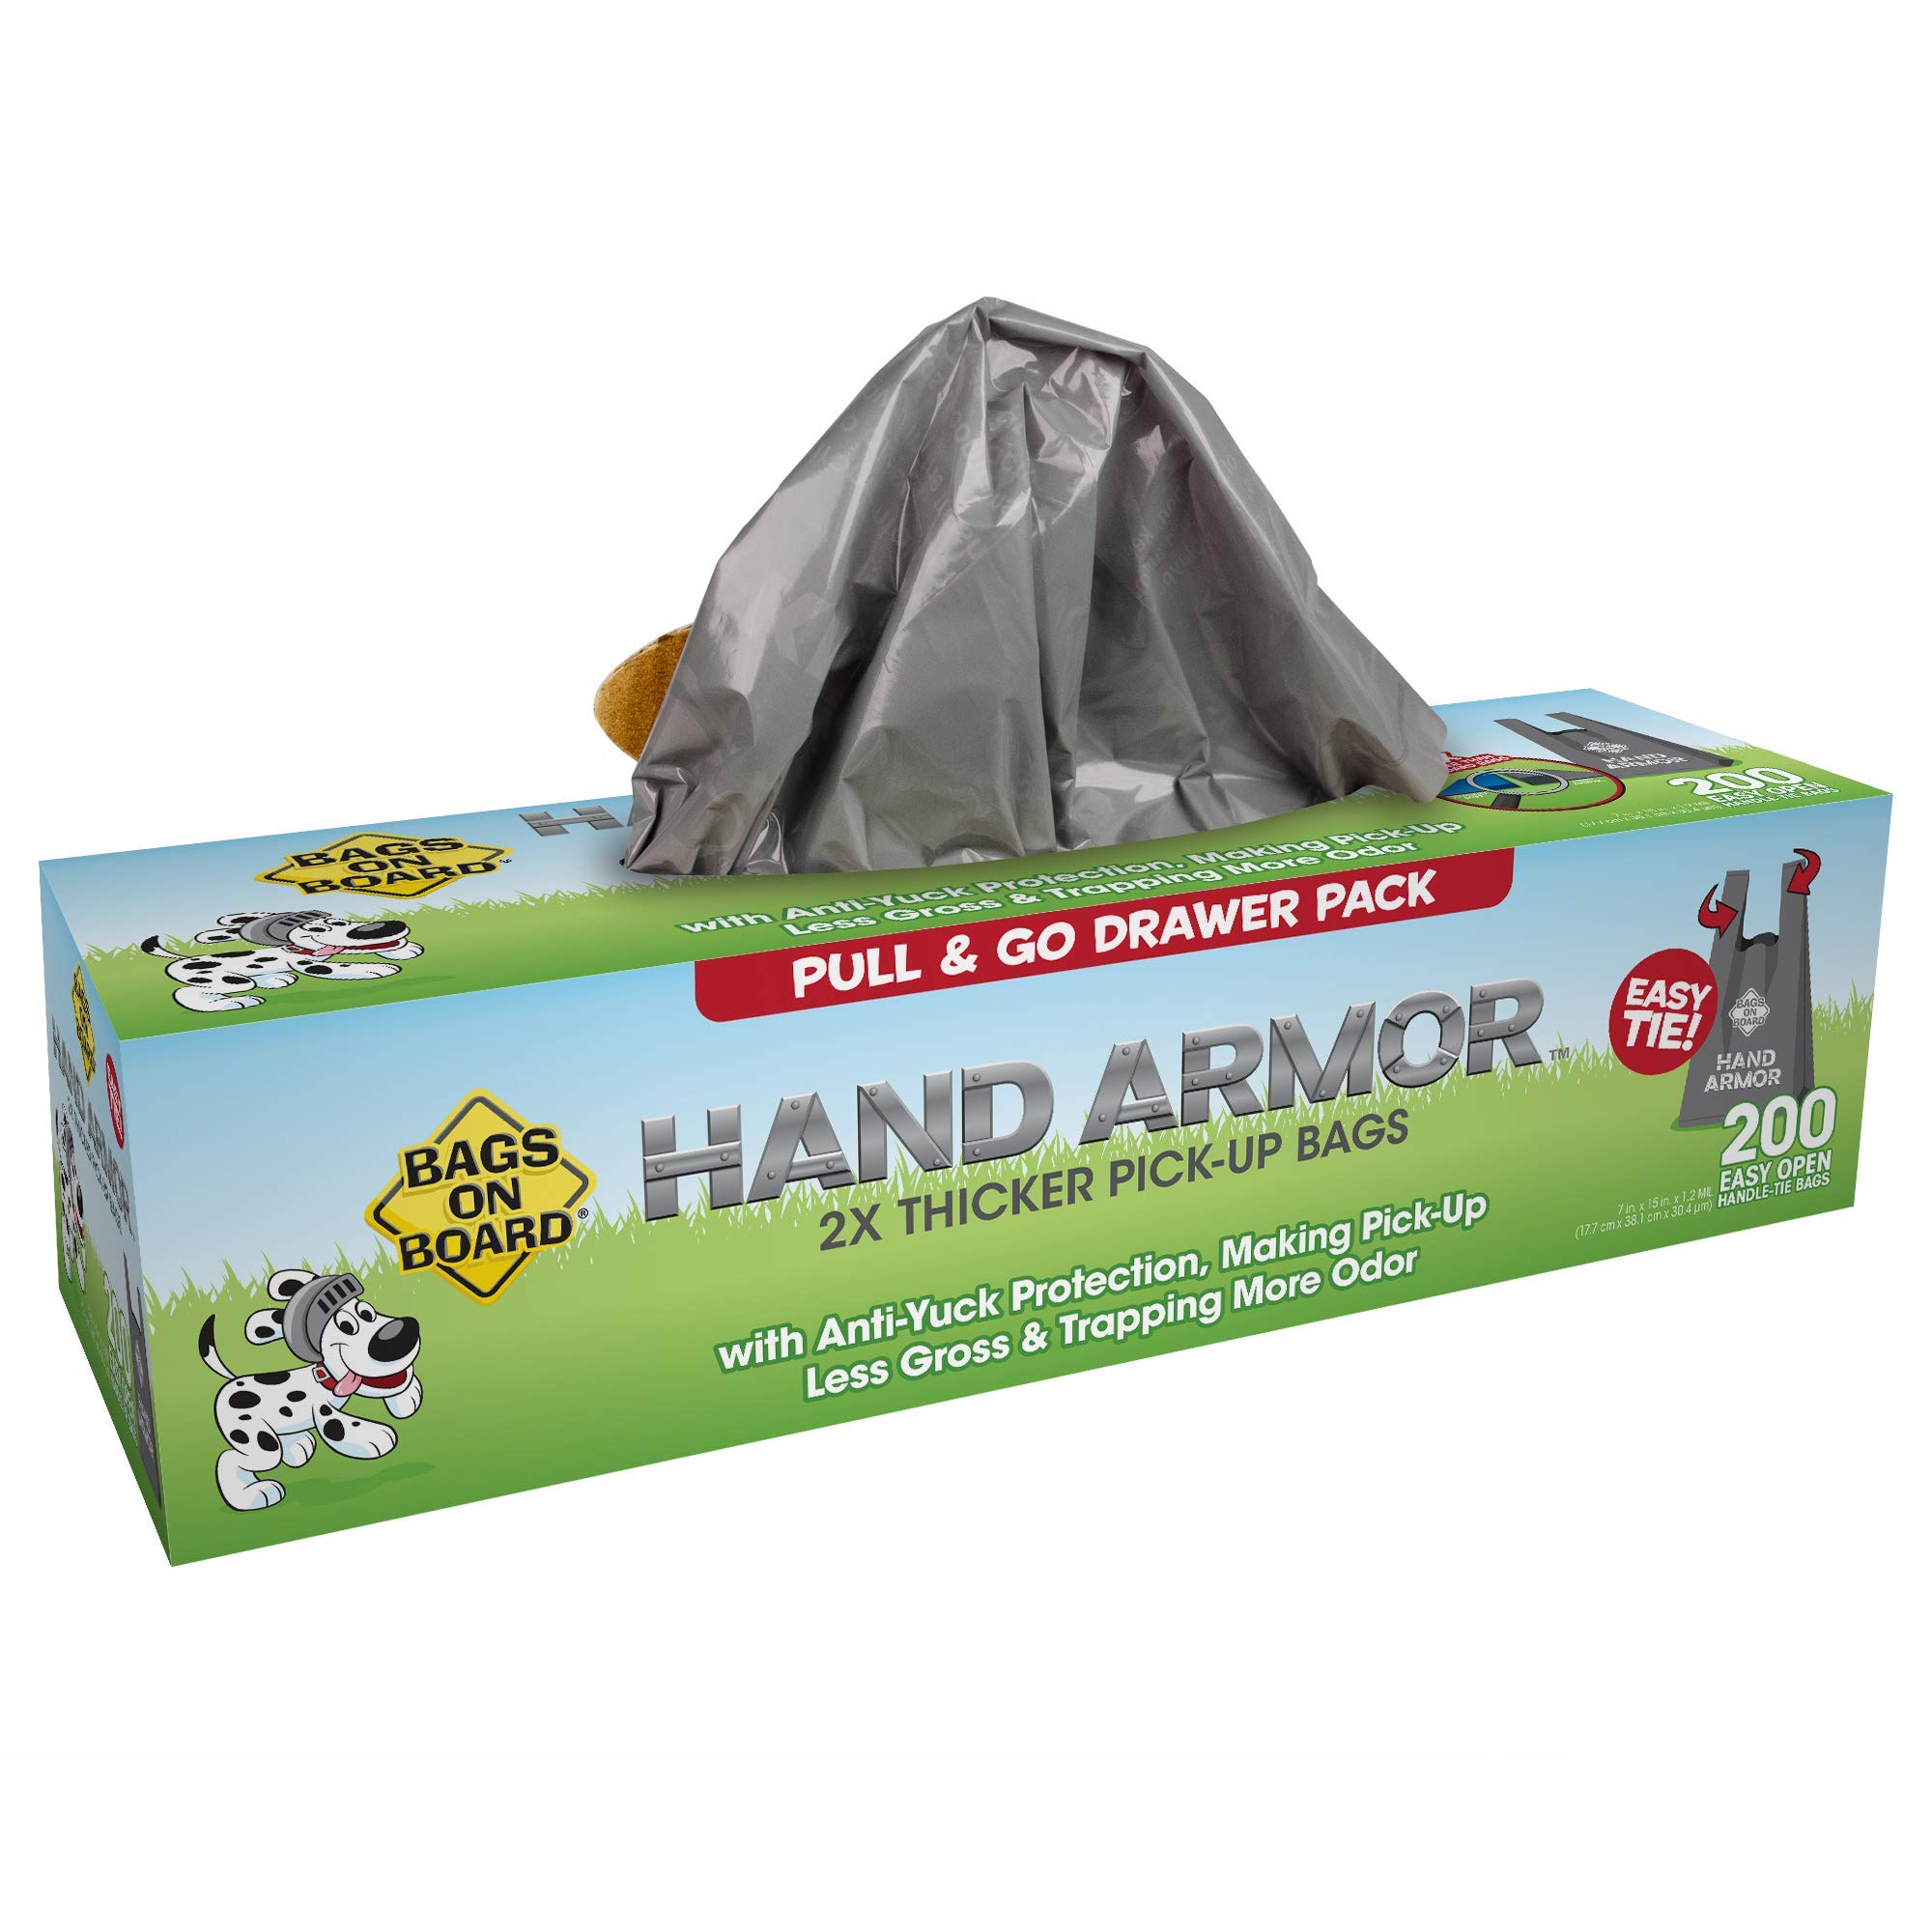 Bags on Board Hand Armour Kotbeutel extra stark - 200 Beutel mit Griff im Pull & Go Spender